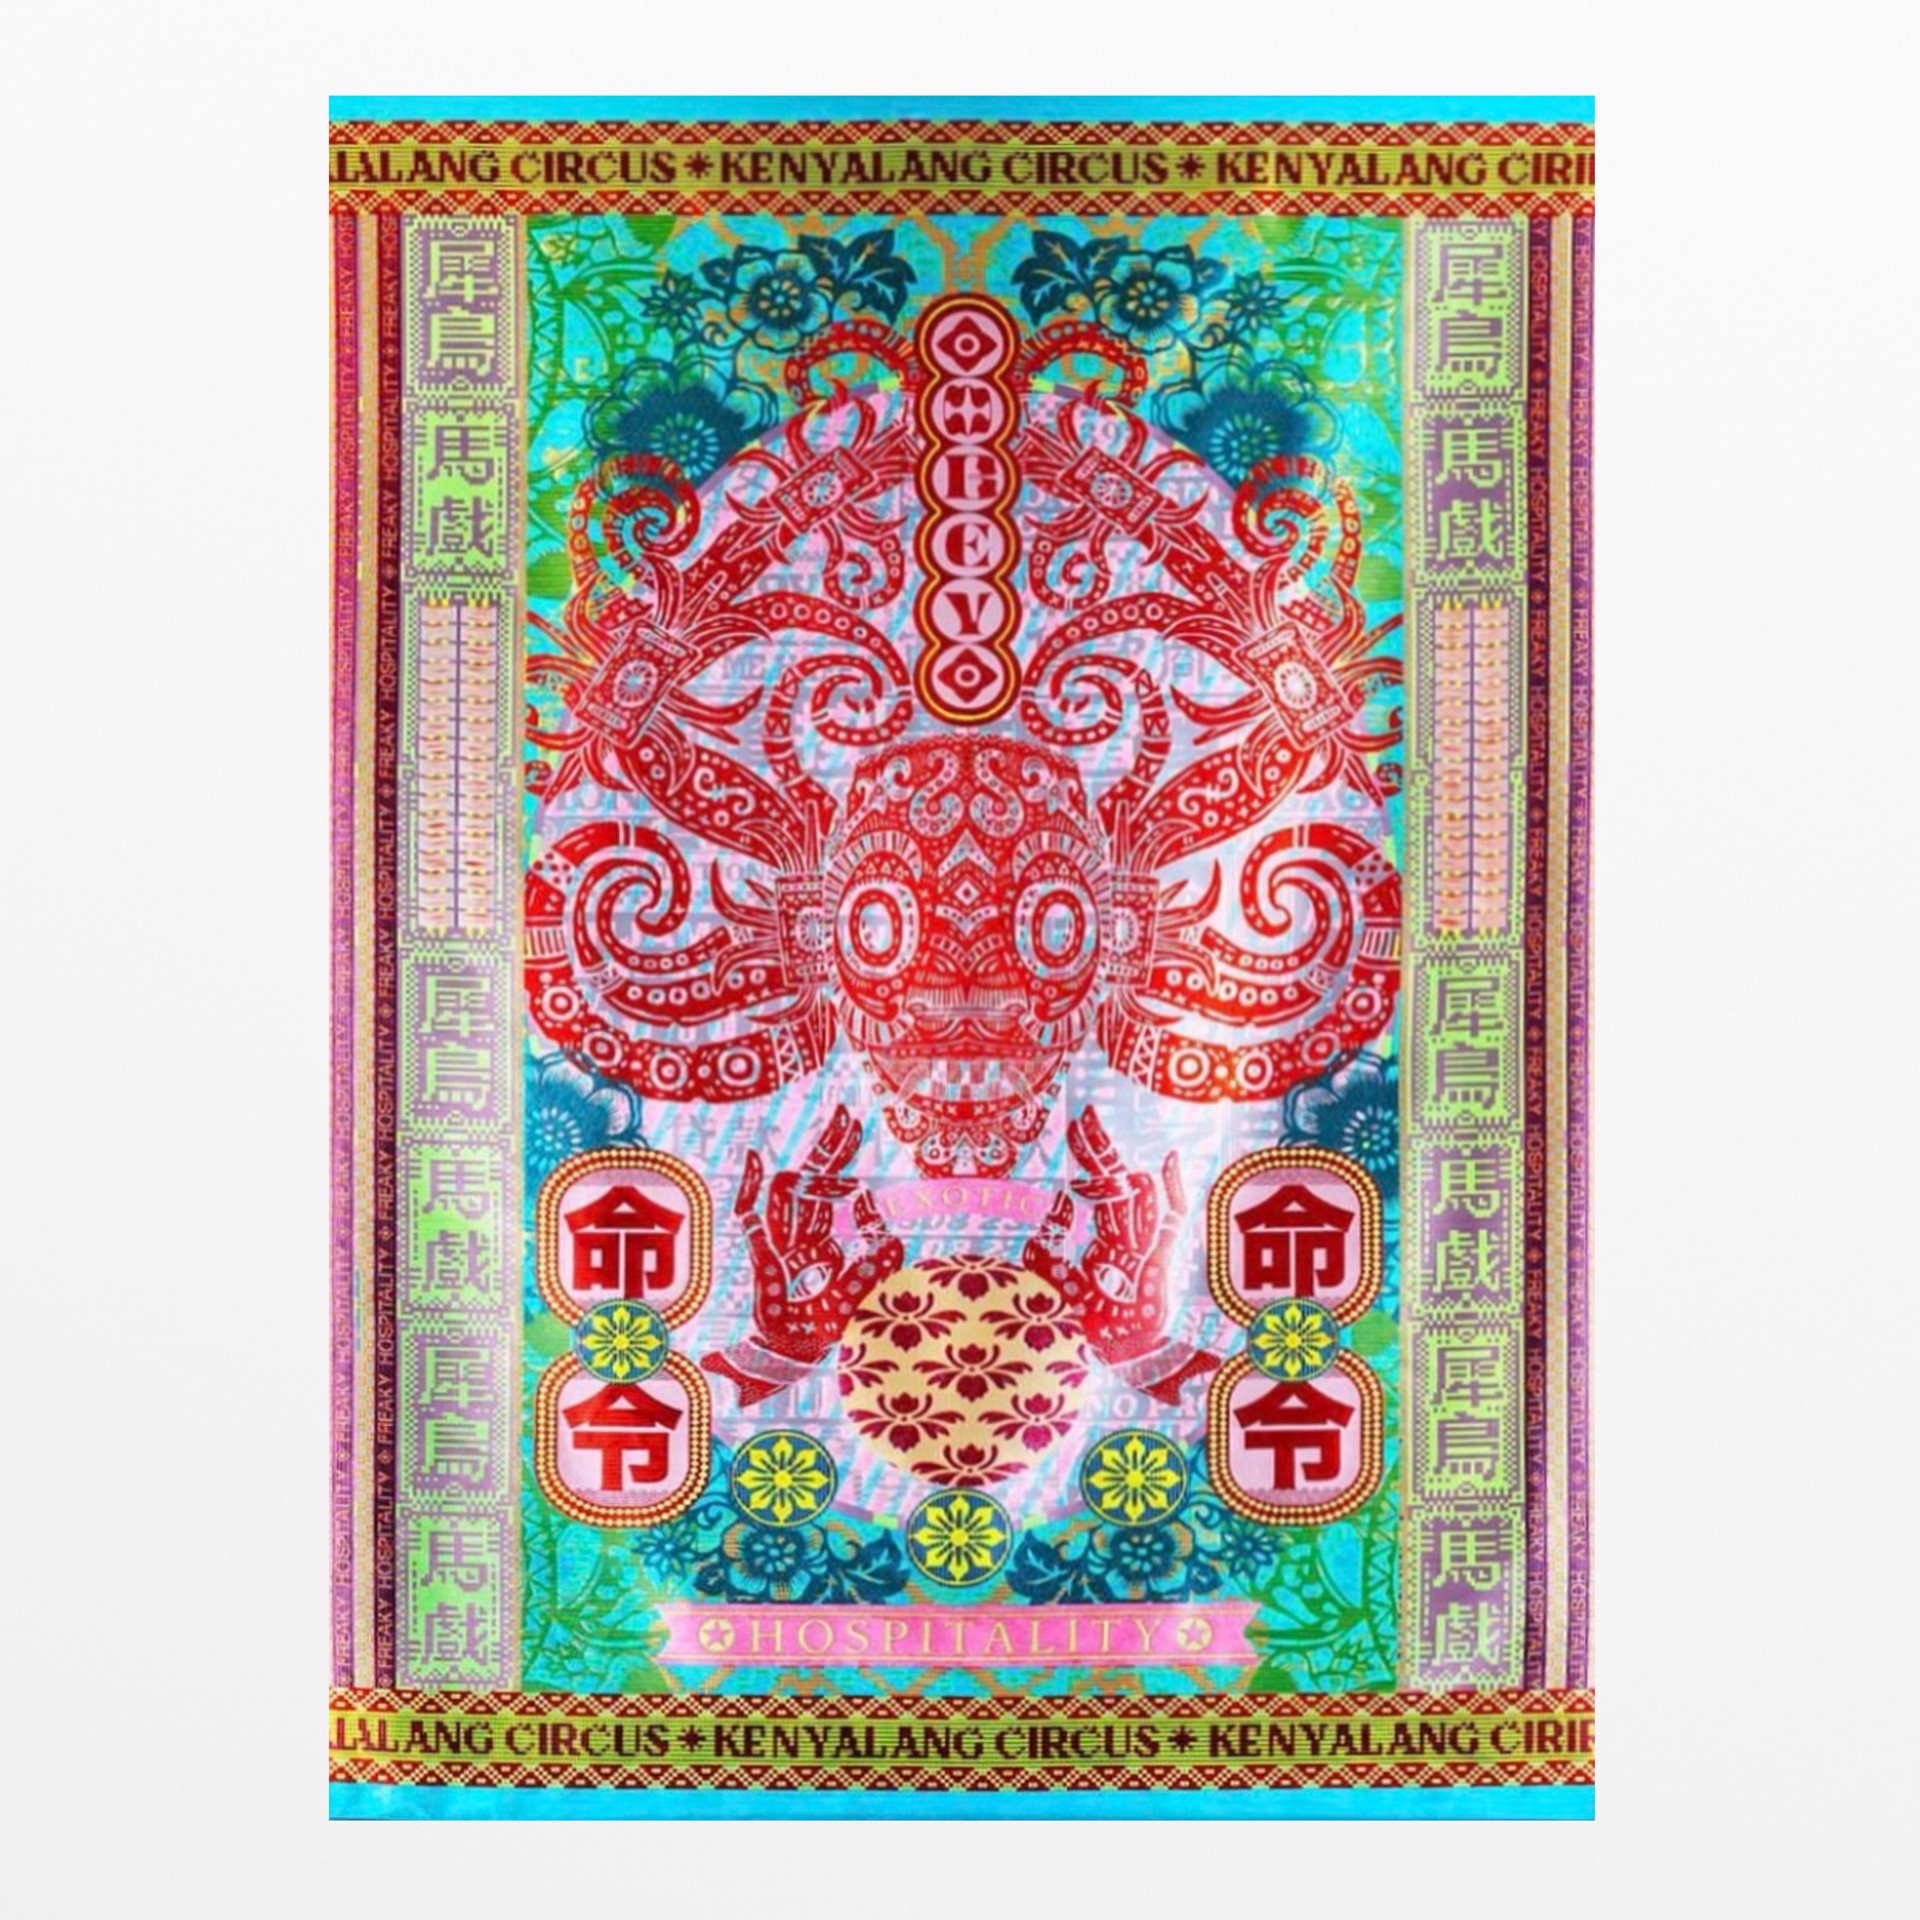 Exotic Hospitality (Woven Poster #6) by Marcos Kueh